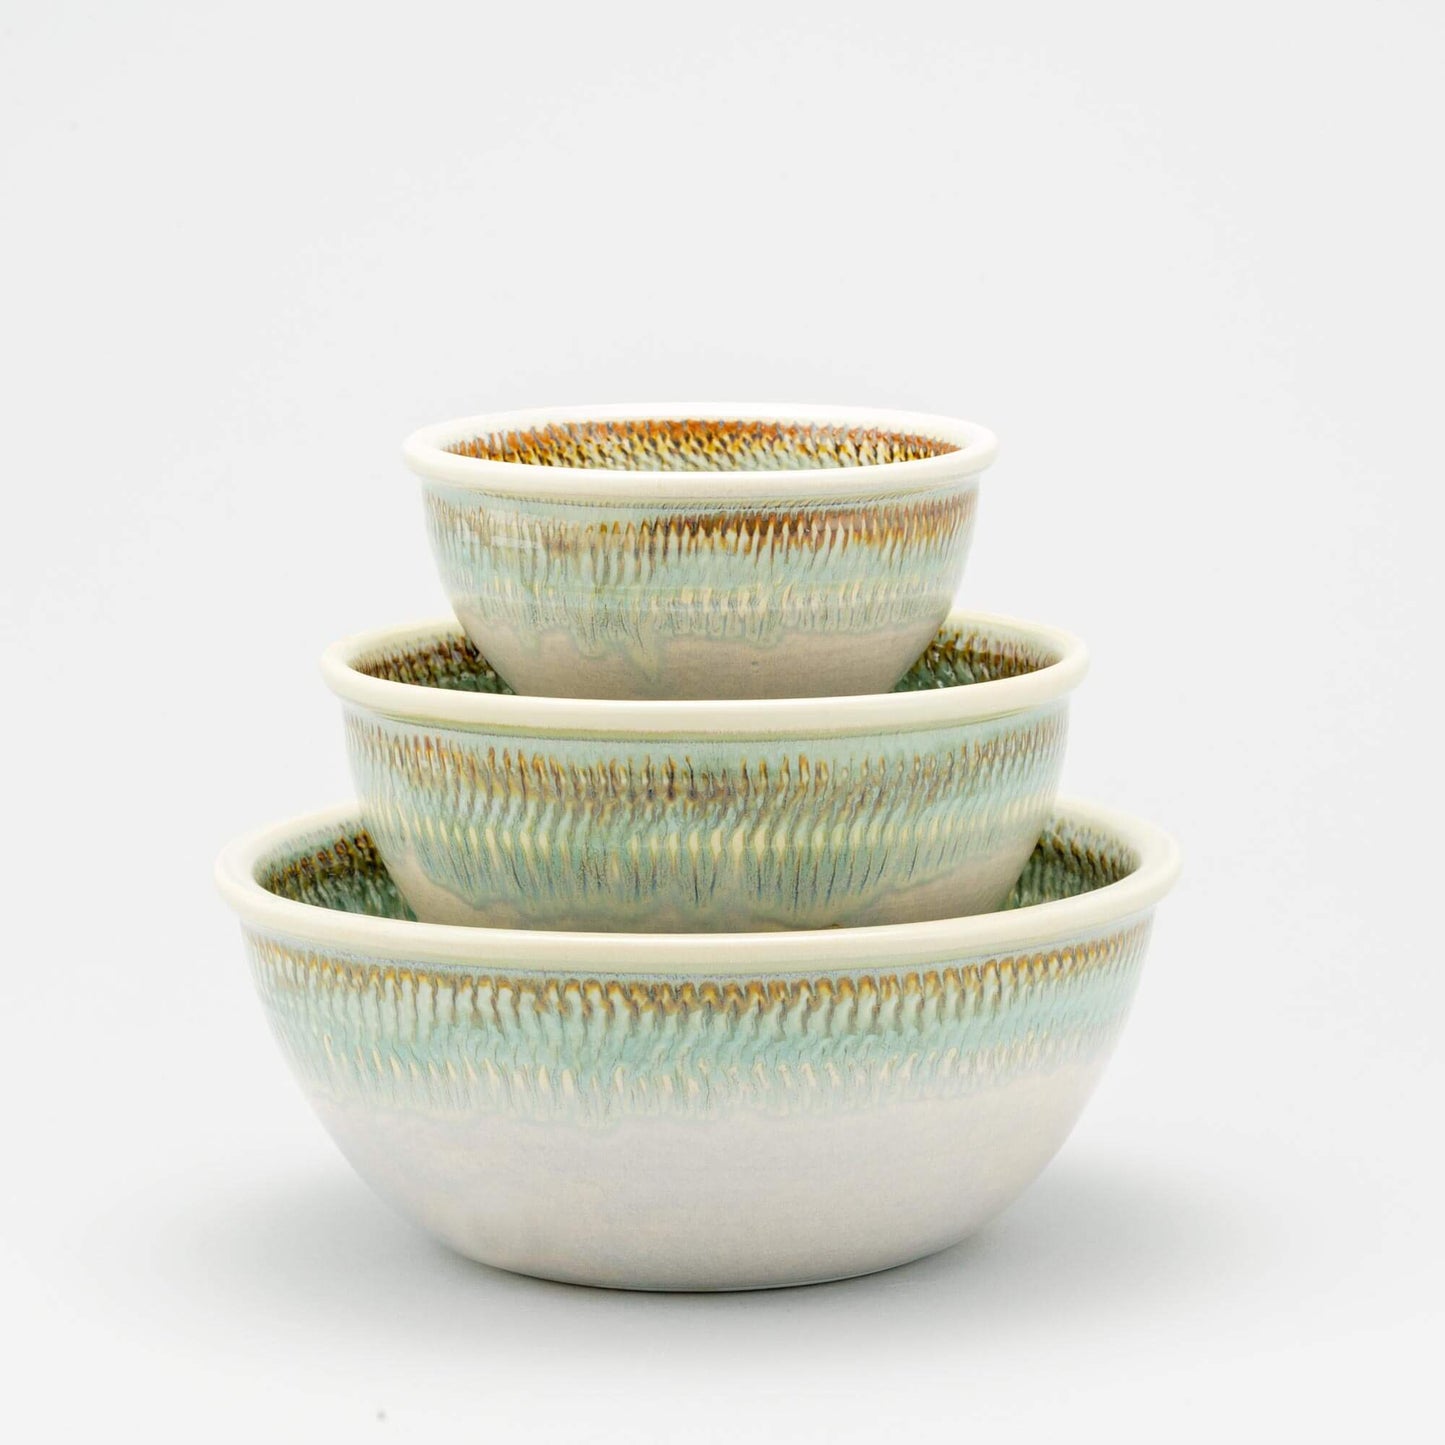 Handmade Pottery Mixing Bowl Set in Ivory & Green Oribe pattern made by Georgetown Pottery in Maine